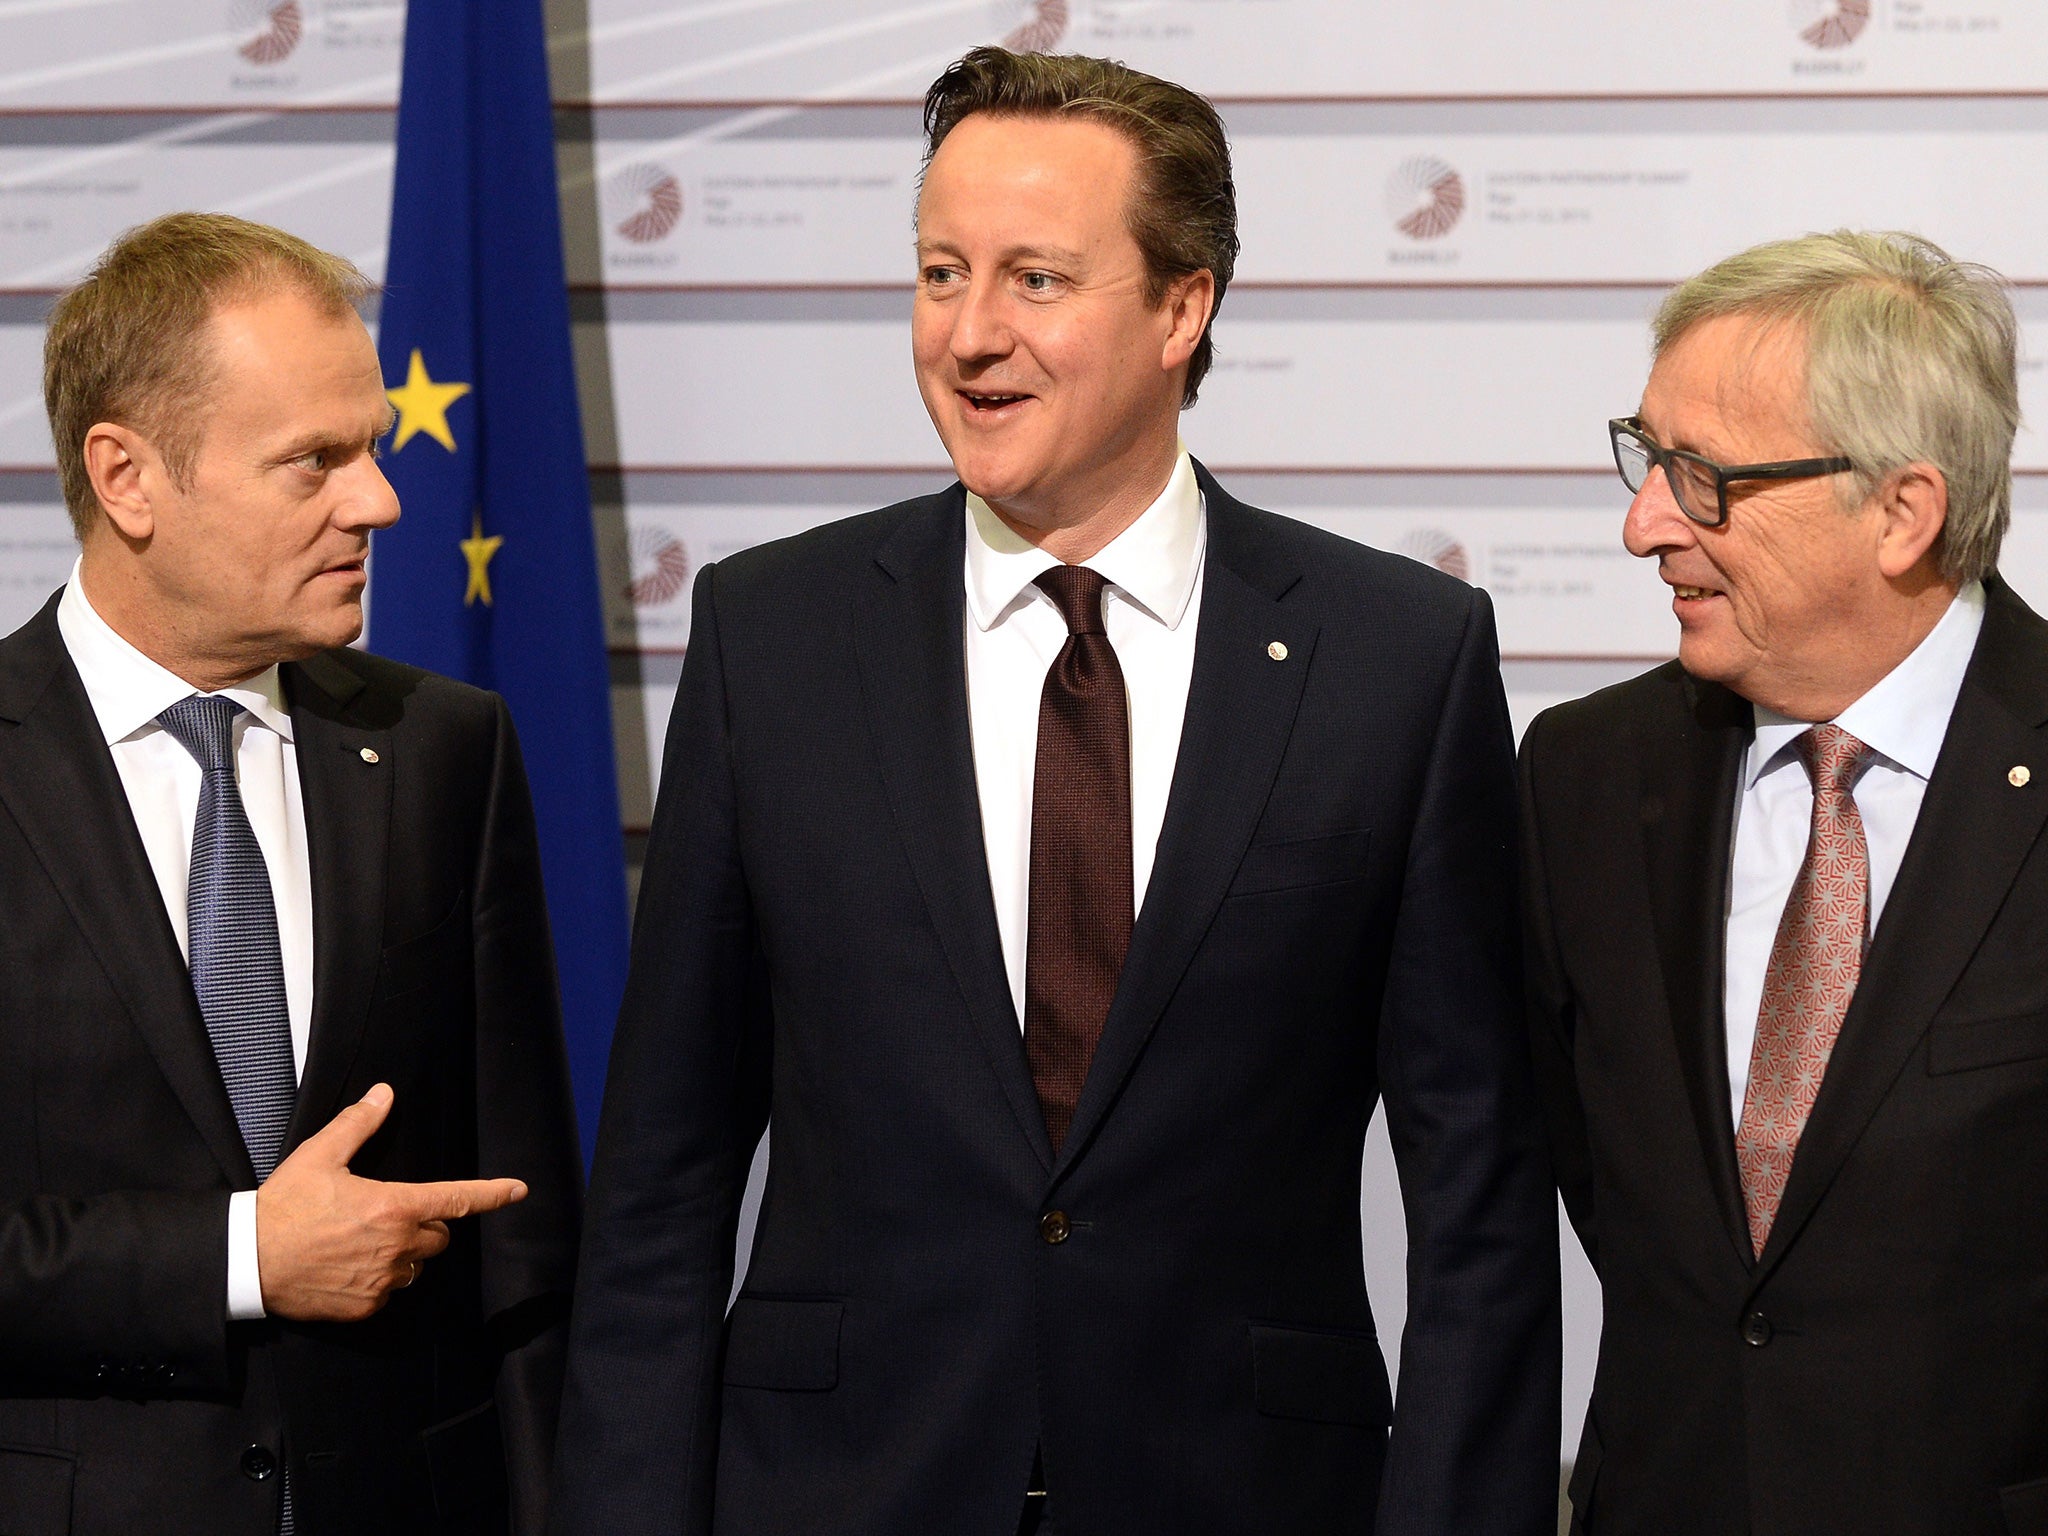 Cameron alongside the President of the European Commission Jean-Claude Juncker and President of the European Council Donald Tusk (L)